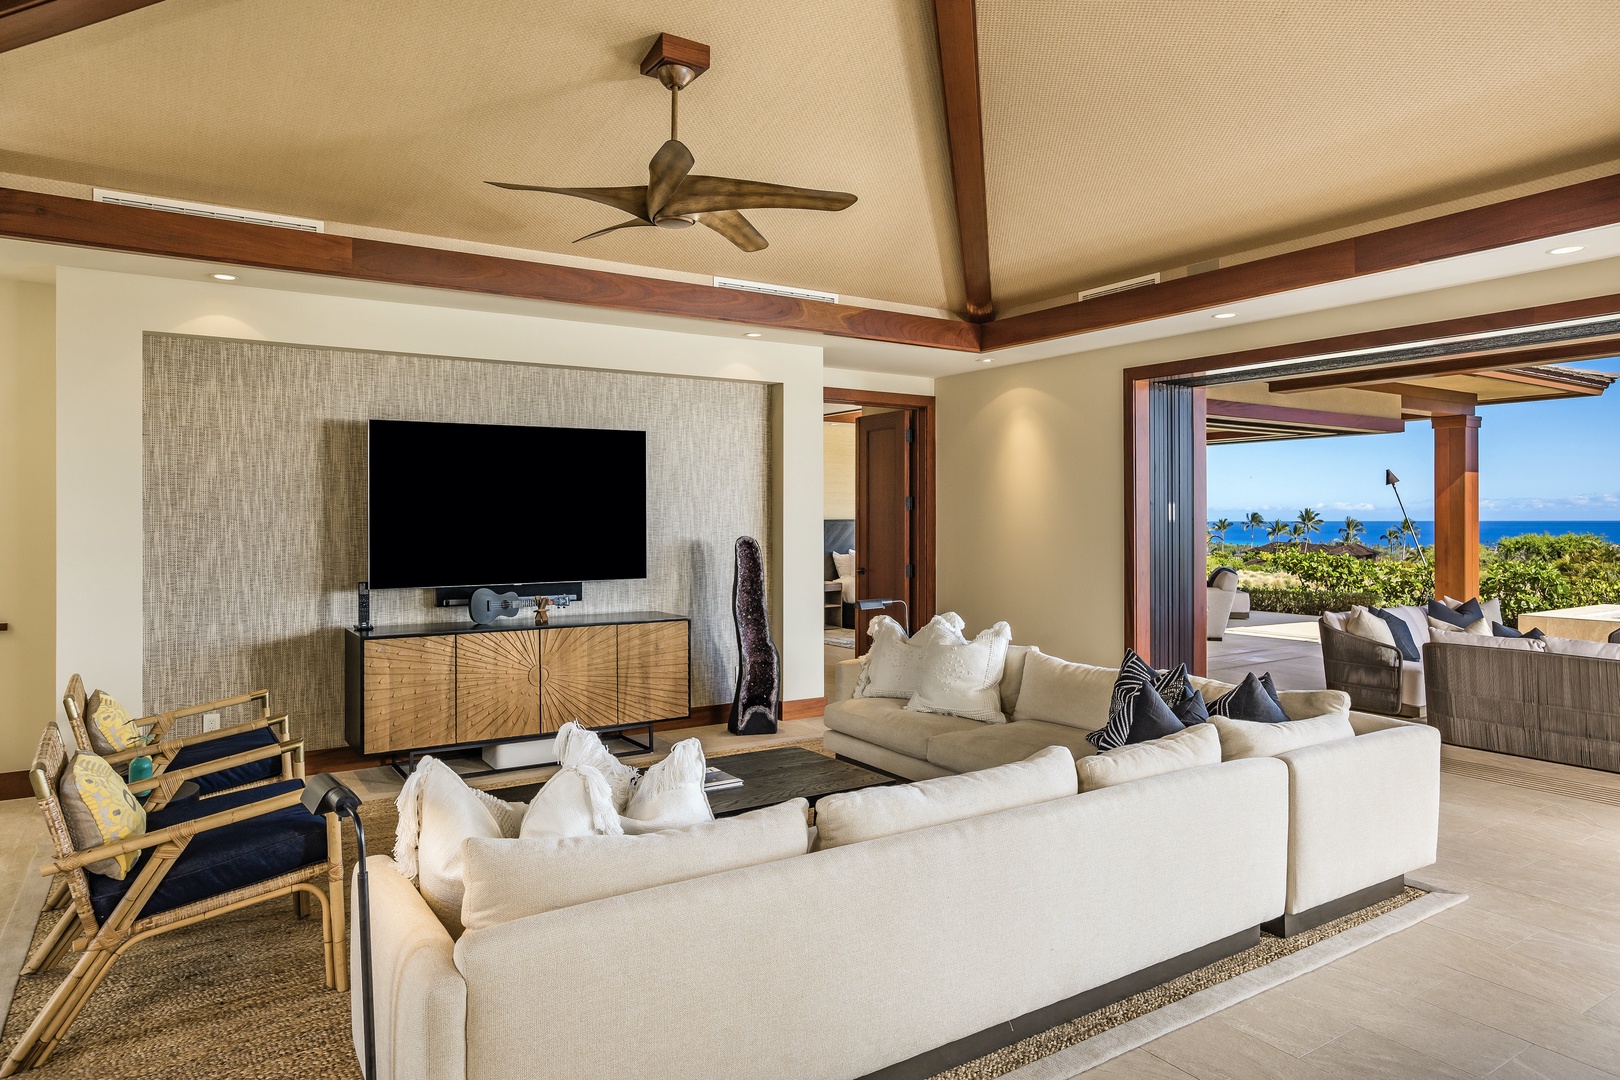 Kailua Kona Vacation Rentals, 4BD Kulanakauhale (3558) Estate Home at Four Seasons Resort at Hualalai - The living area’s wraparound plush seating, inset entertainment wall with 75” smart flat screen TV and Sonos audio system provide entertainment perfection.